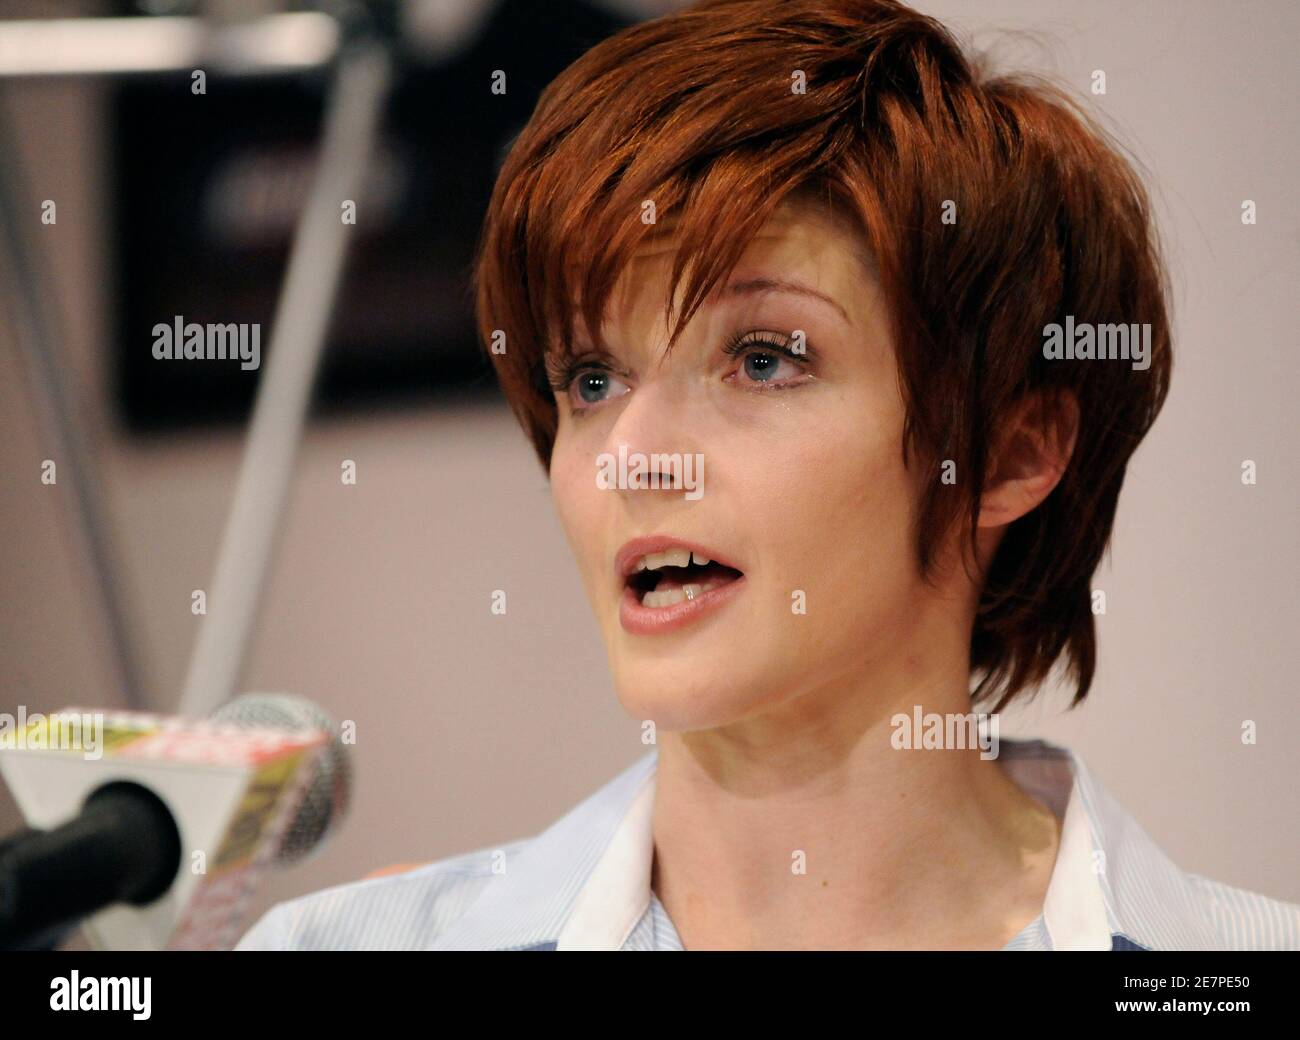 Veronica Siwik-Daniels speaks during a news conference after watching the telecast of Tiger Woods' news conference in Los Angeles, California, February 19, 2010. Siwik-Daniels, also known as Joslyn James, is a former porn star and alleged mistress of Tiger Woods. REUTERS/Gus Ruelas (UNITED STATES - Tags: SPORT GOLF IMAGES OF THE DAY) Stock Photo